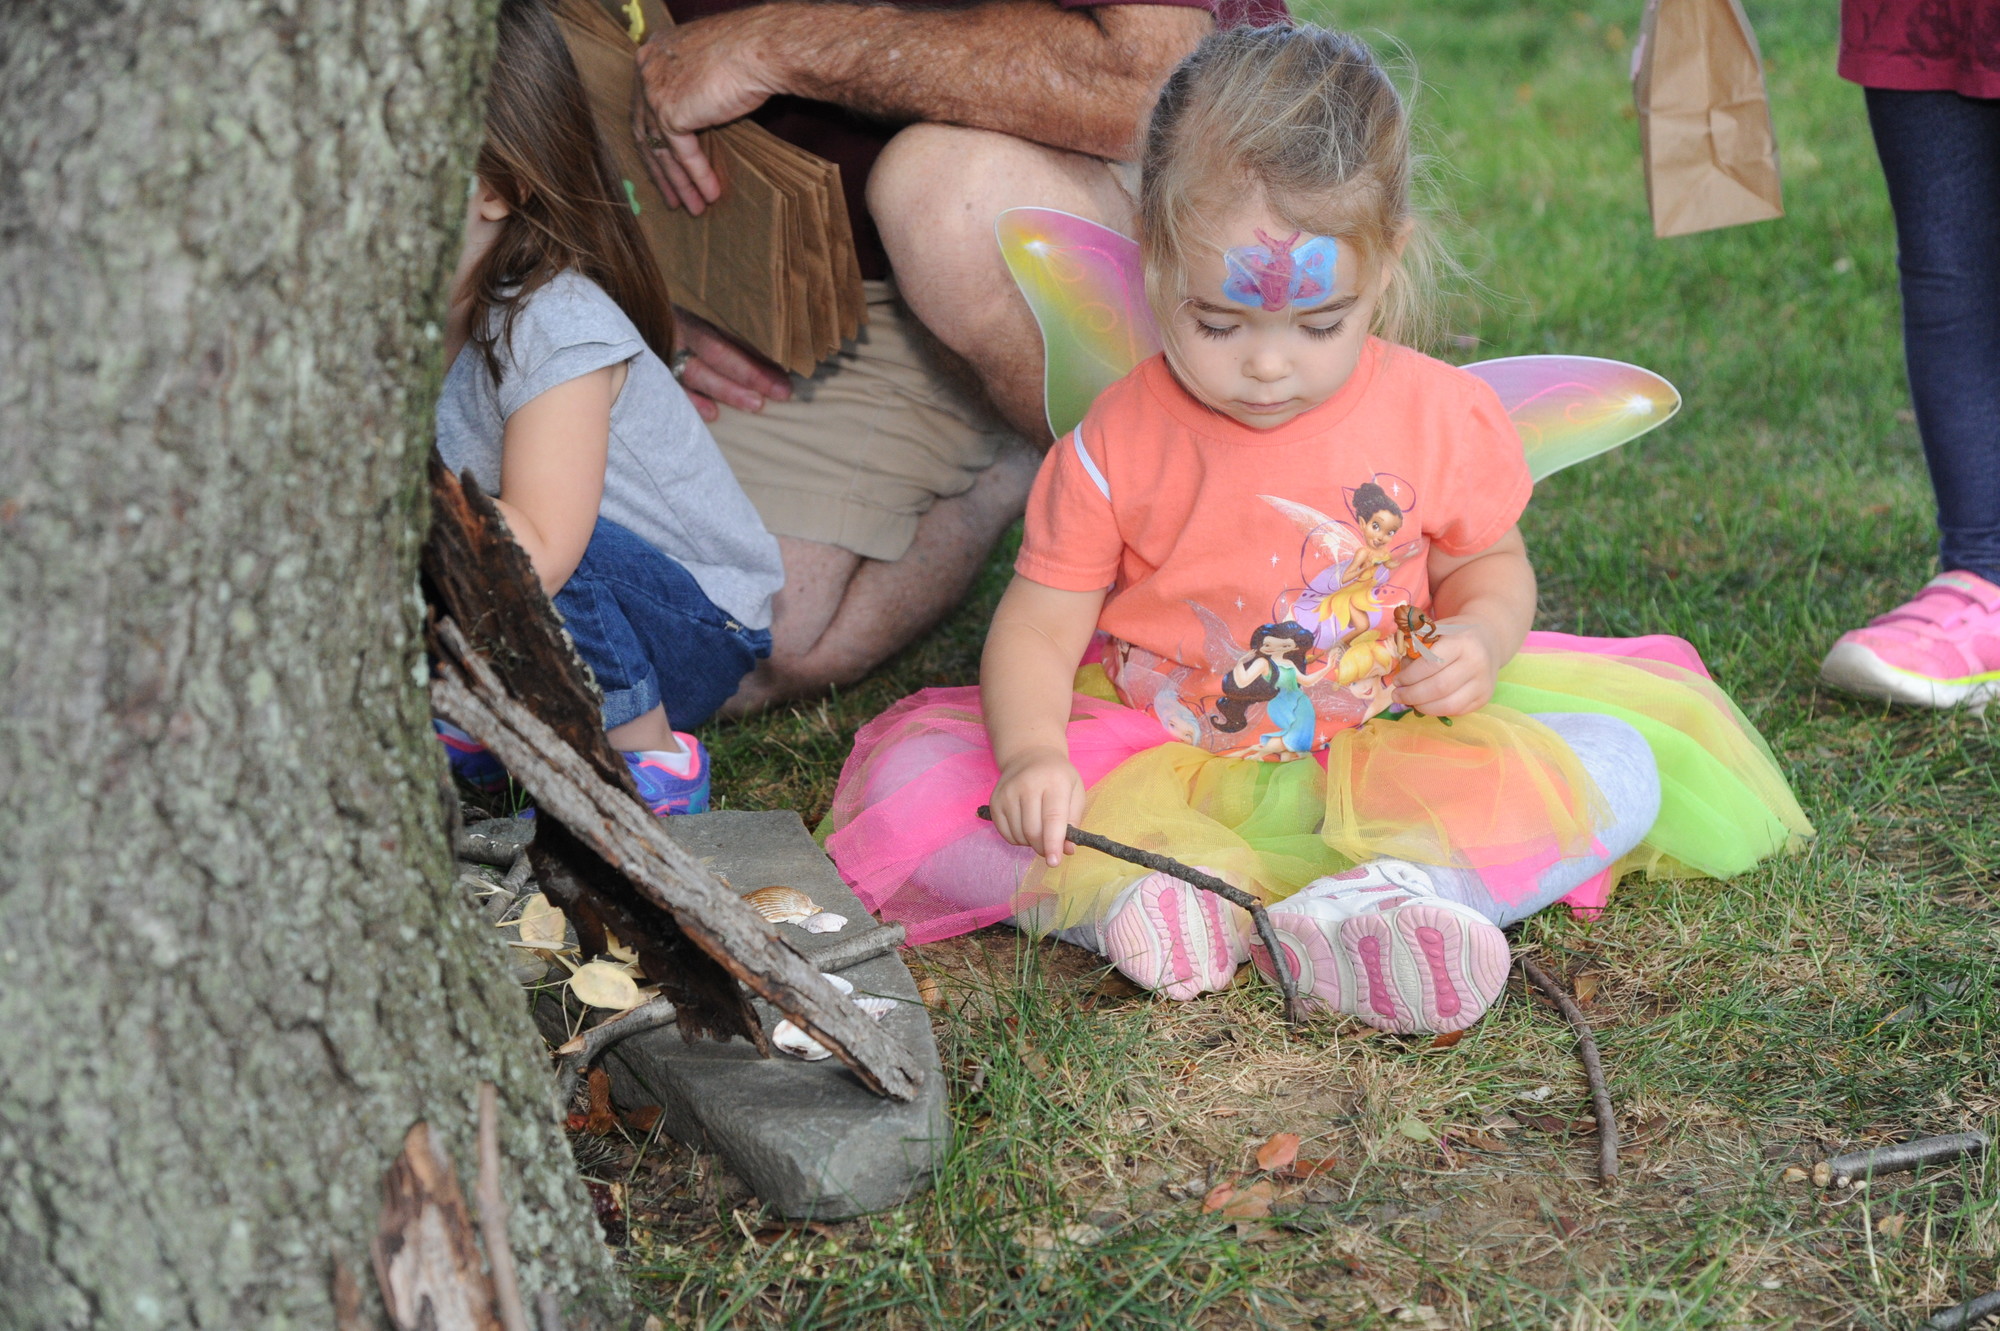 Mia, 2, of North Merrick showed off her fairy wings.